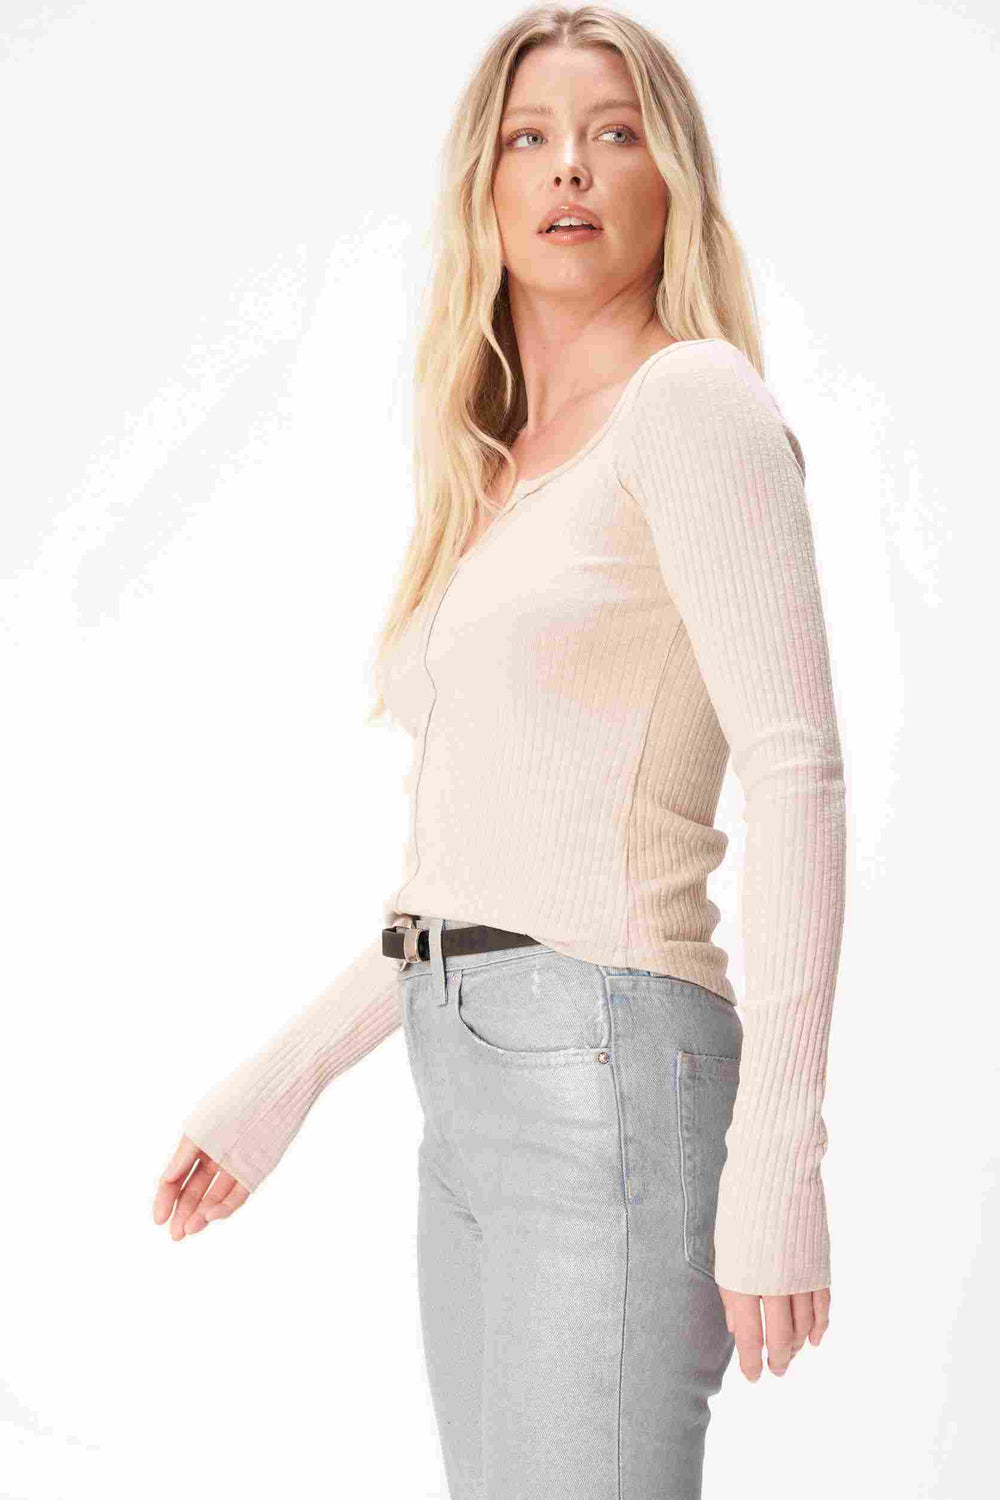 VOYAGER NOTCH NECK RIB LONGSLEEVE-RAW LINEN - Kingfisher Road - Online Boutique